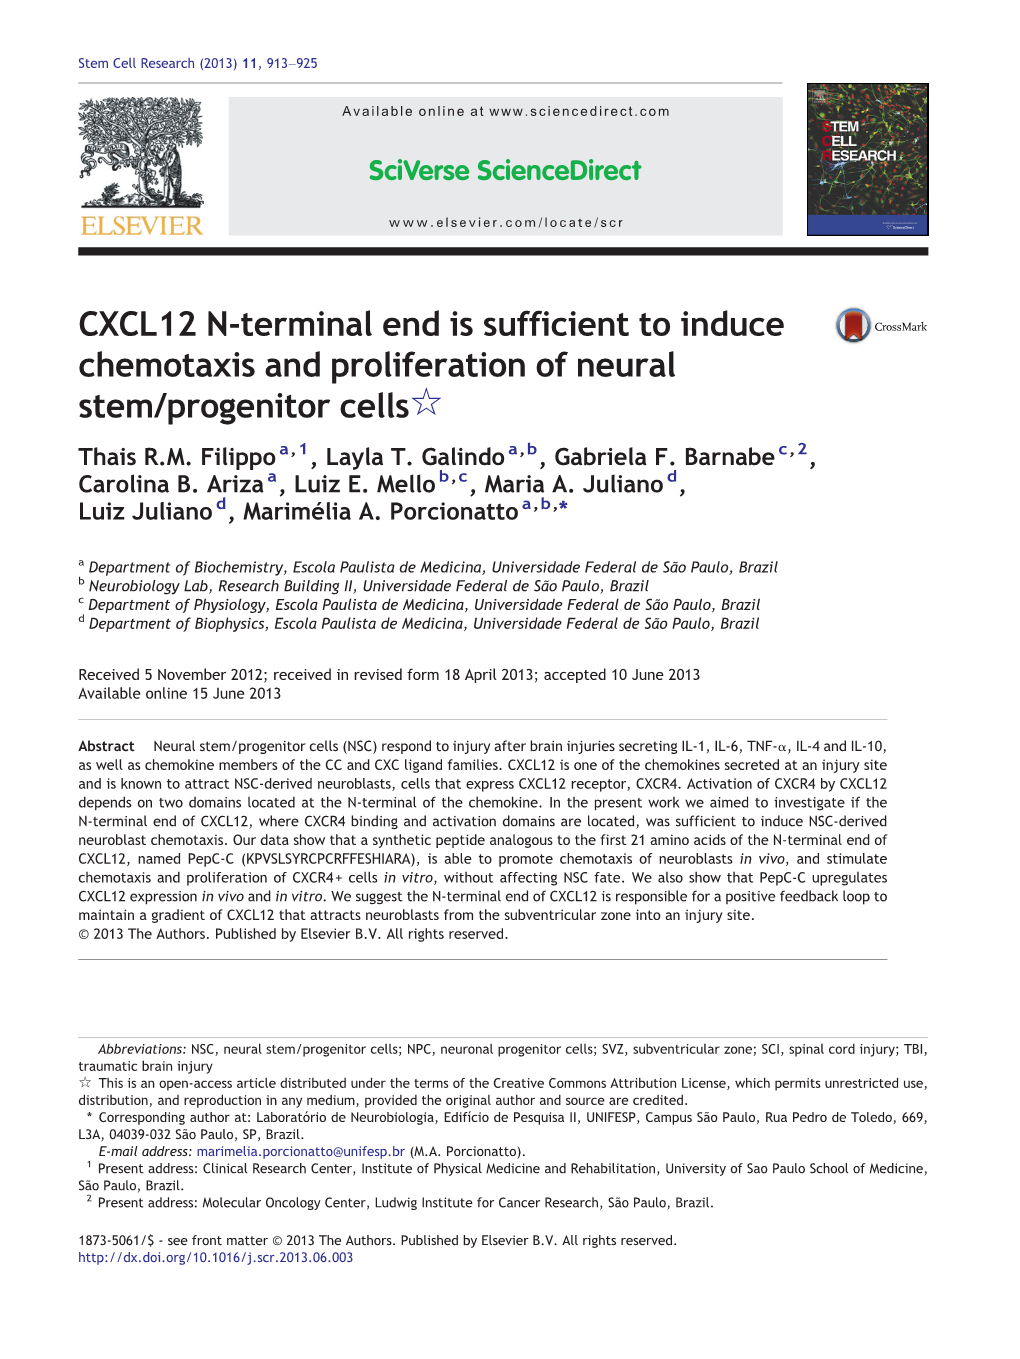 CXCL12 N-Terminal End Is Sufficient to Induce Chemotaxis and Proliferation of Neural Stem/Progenitor Cells☆ Thais R.M